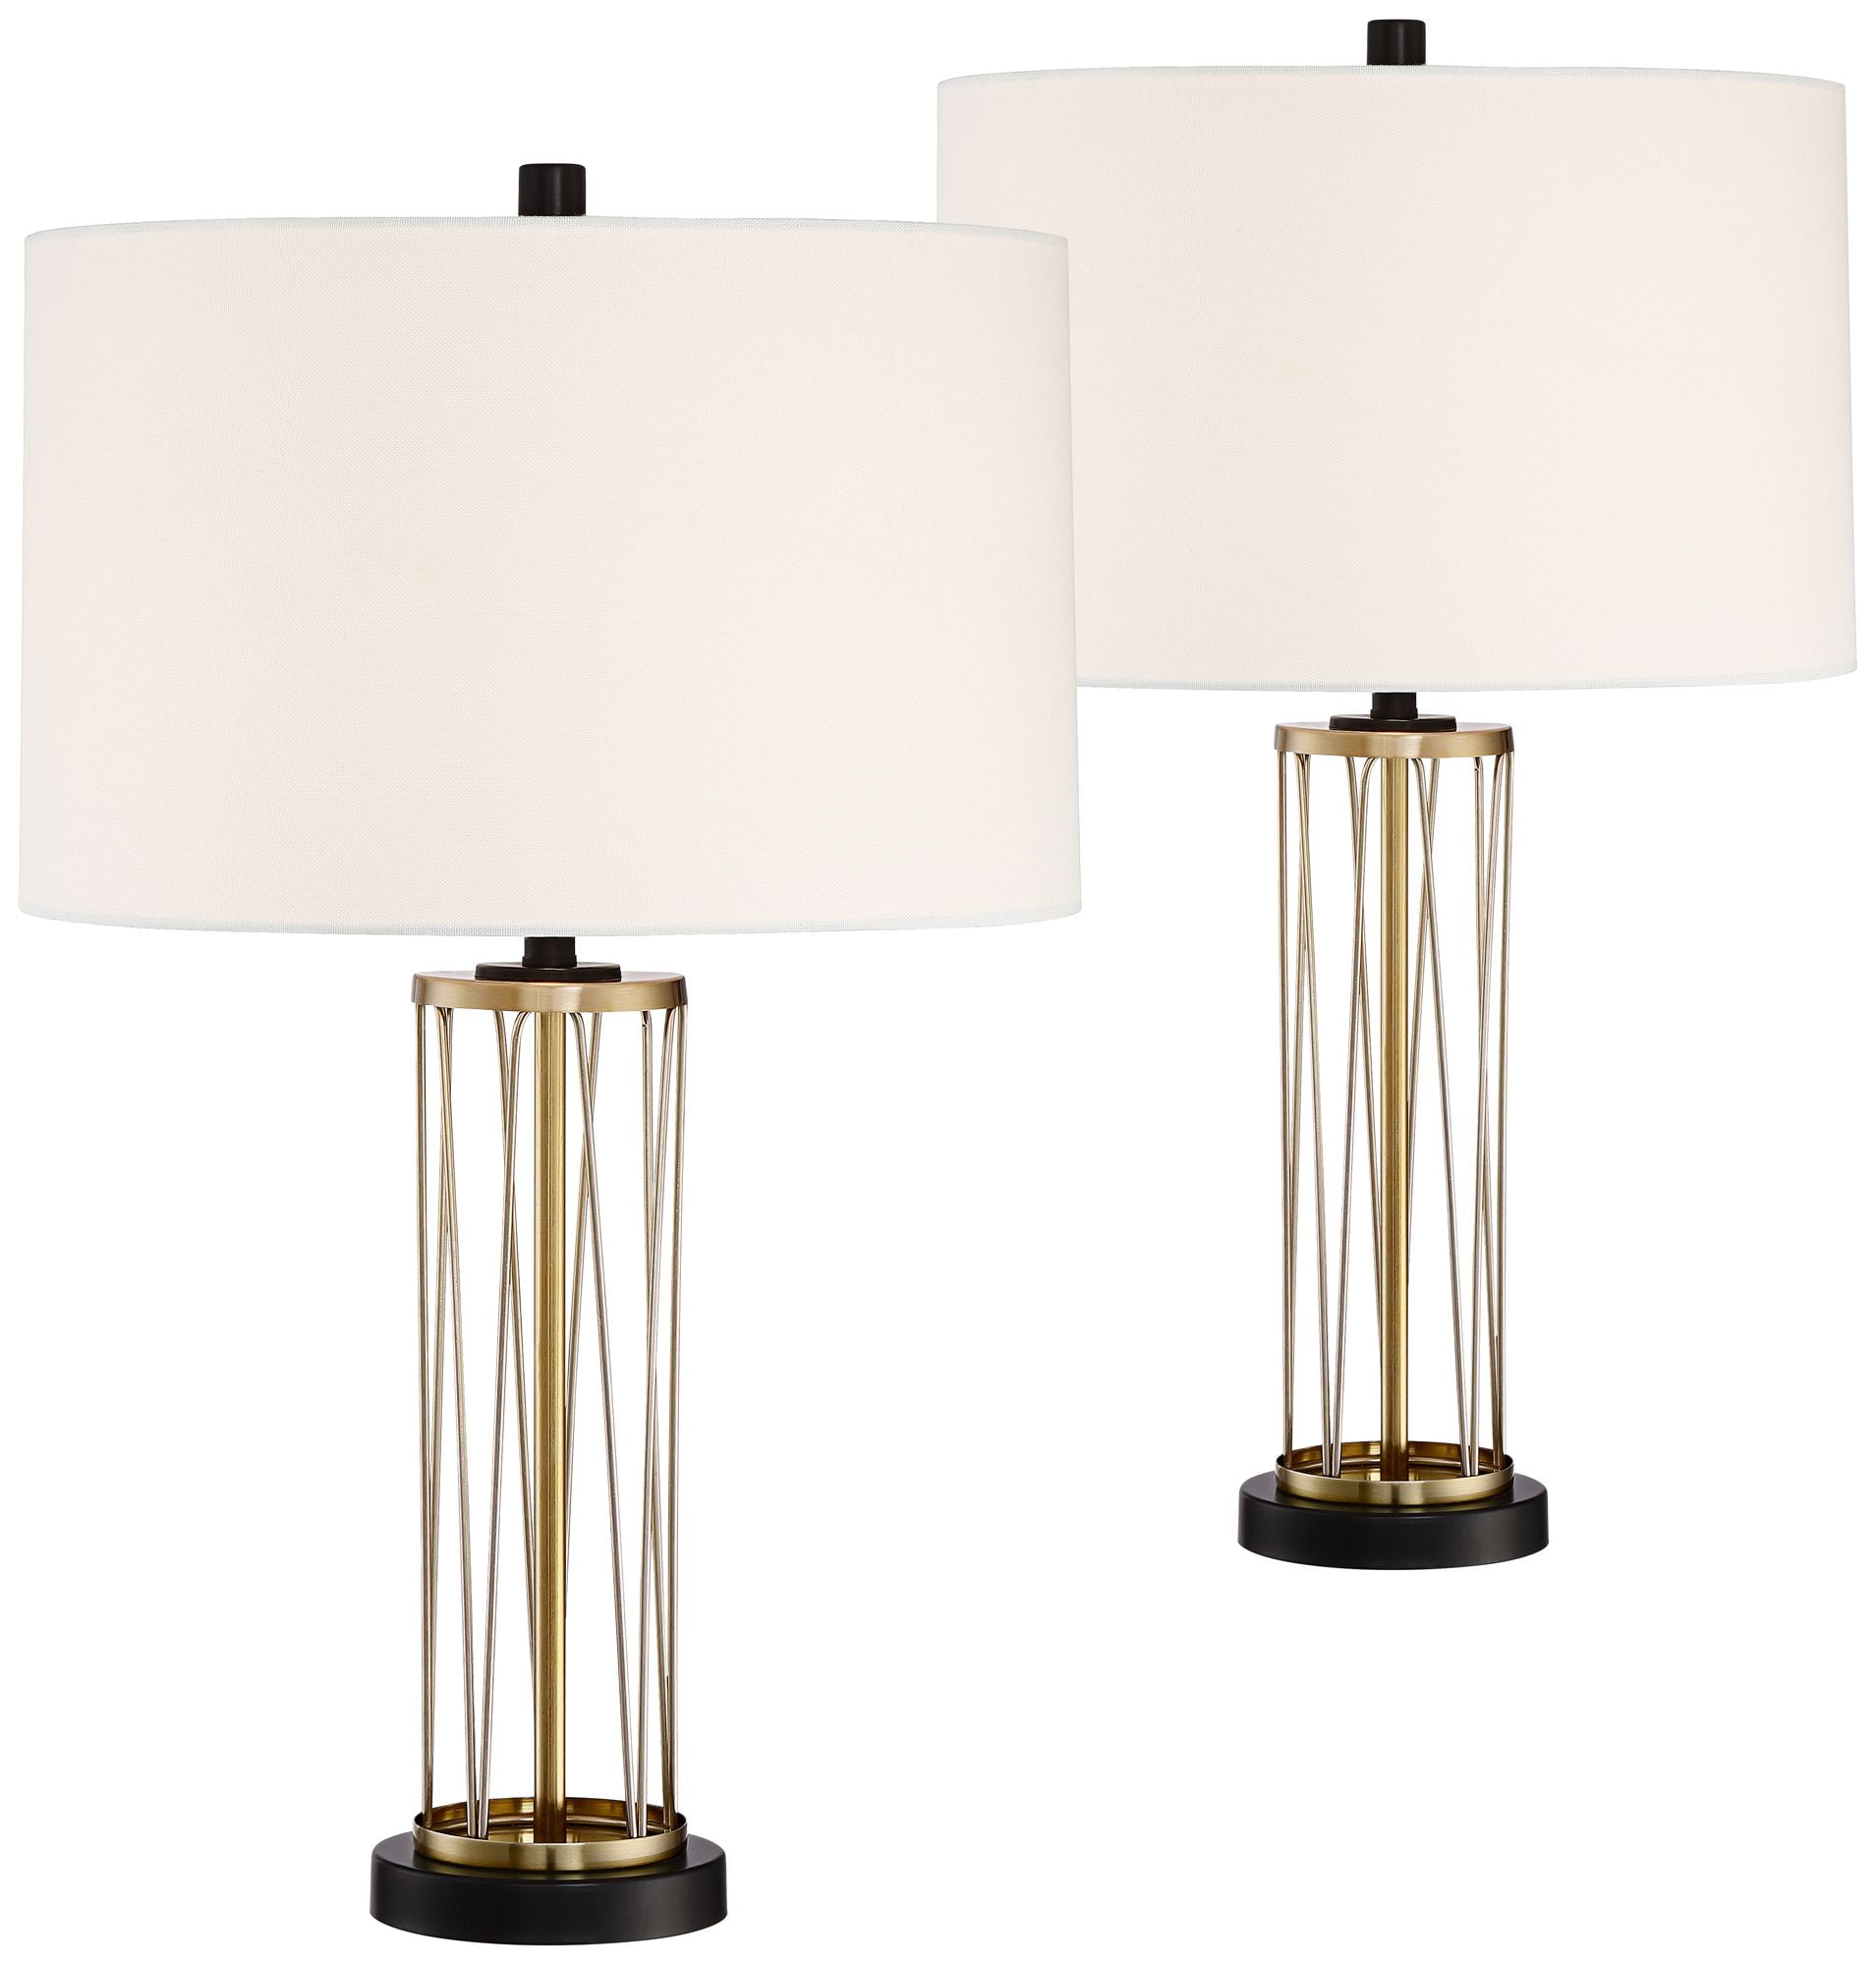 360 Lighting Modern Table Lamps Set Of, Table Lamps Gold Finish